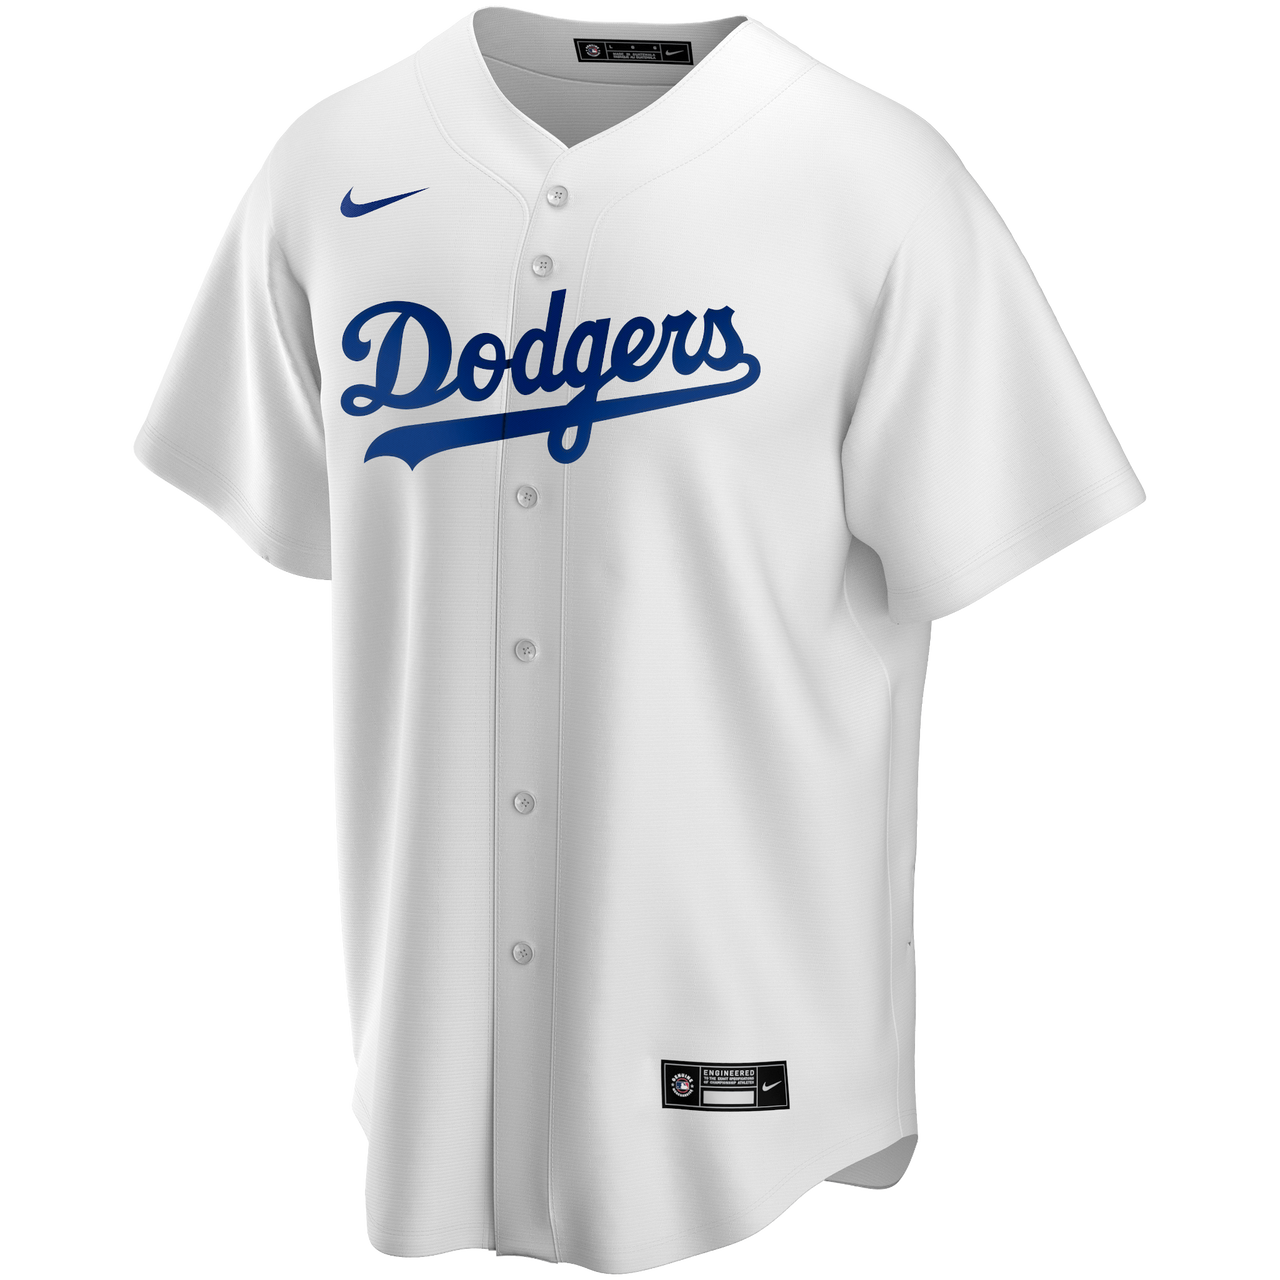 Nike Jackie Robinson Day 42 Youth Jersey - Dodgers Kids Home Jersey